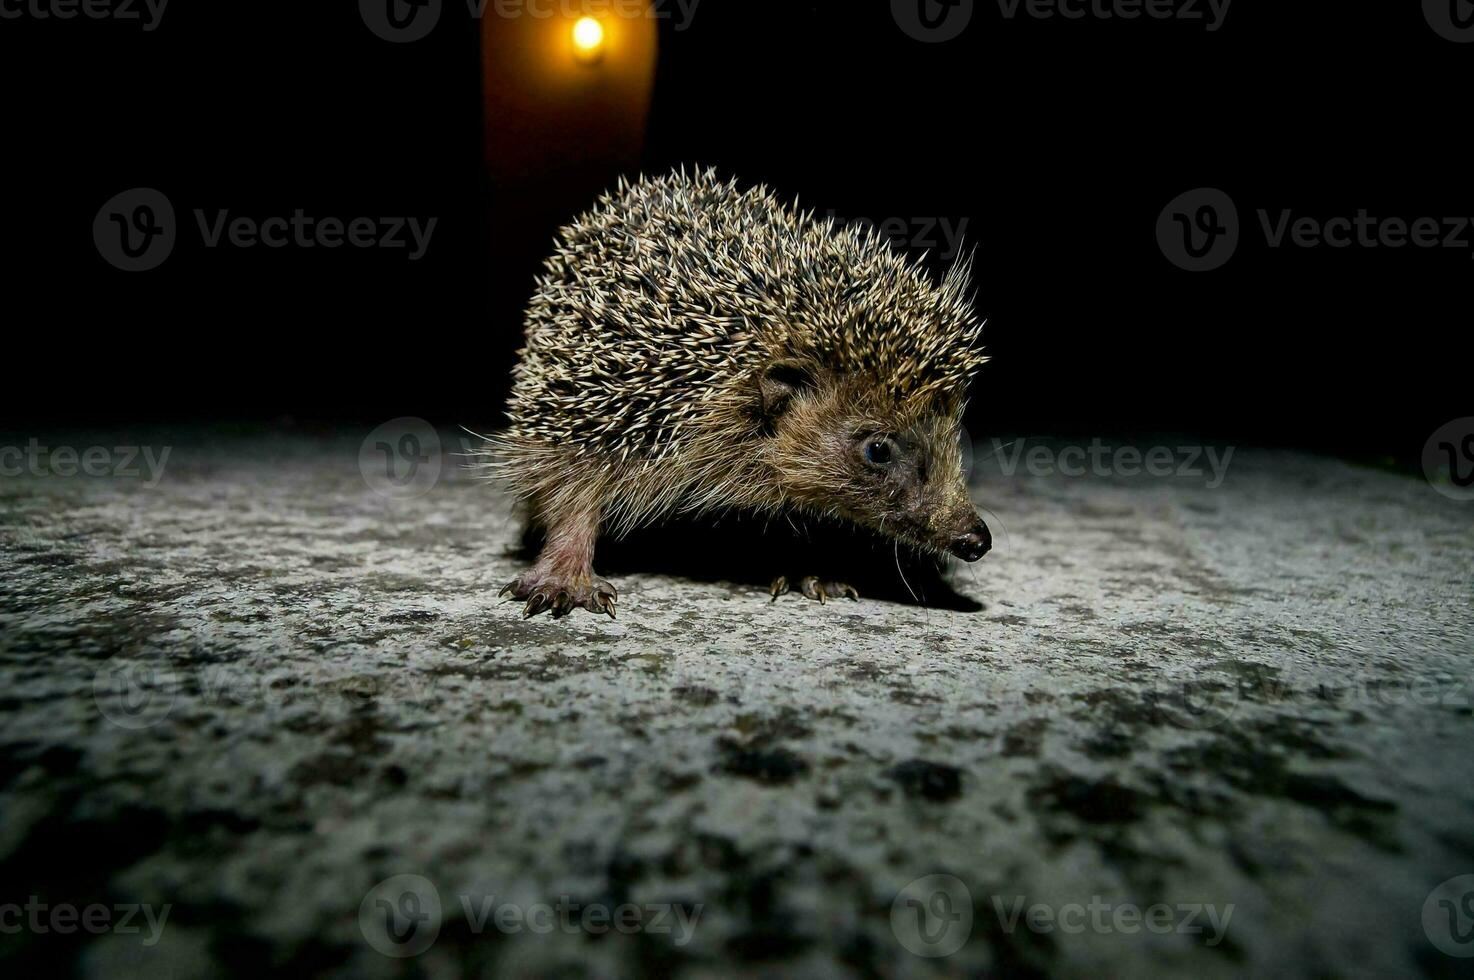 a hedgehog is walking on the ground at night photo